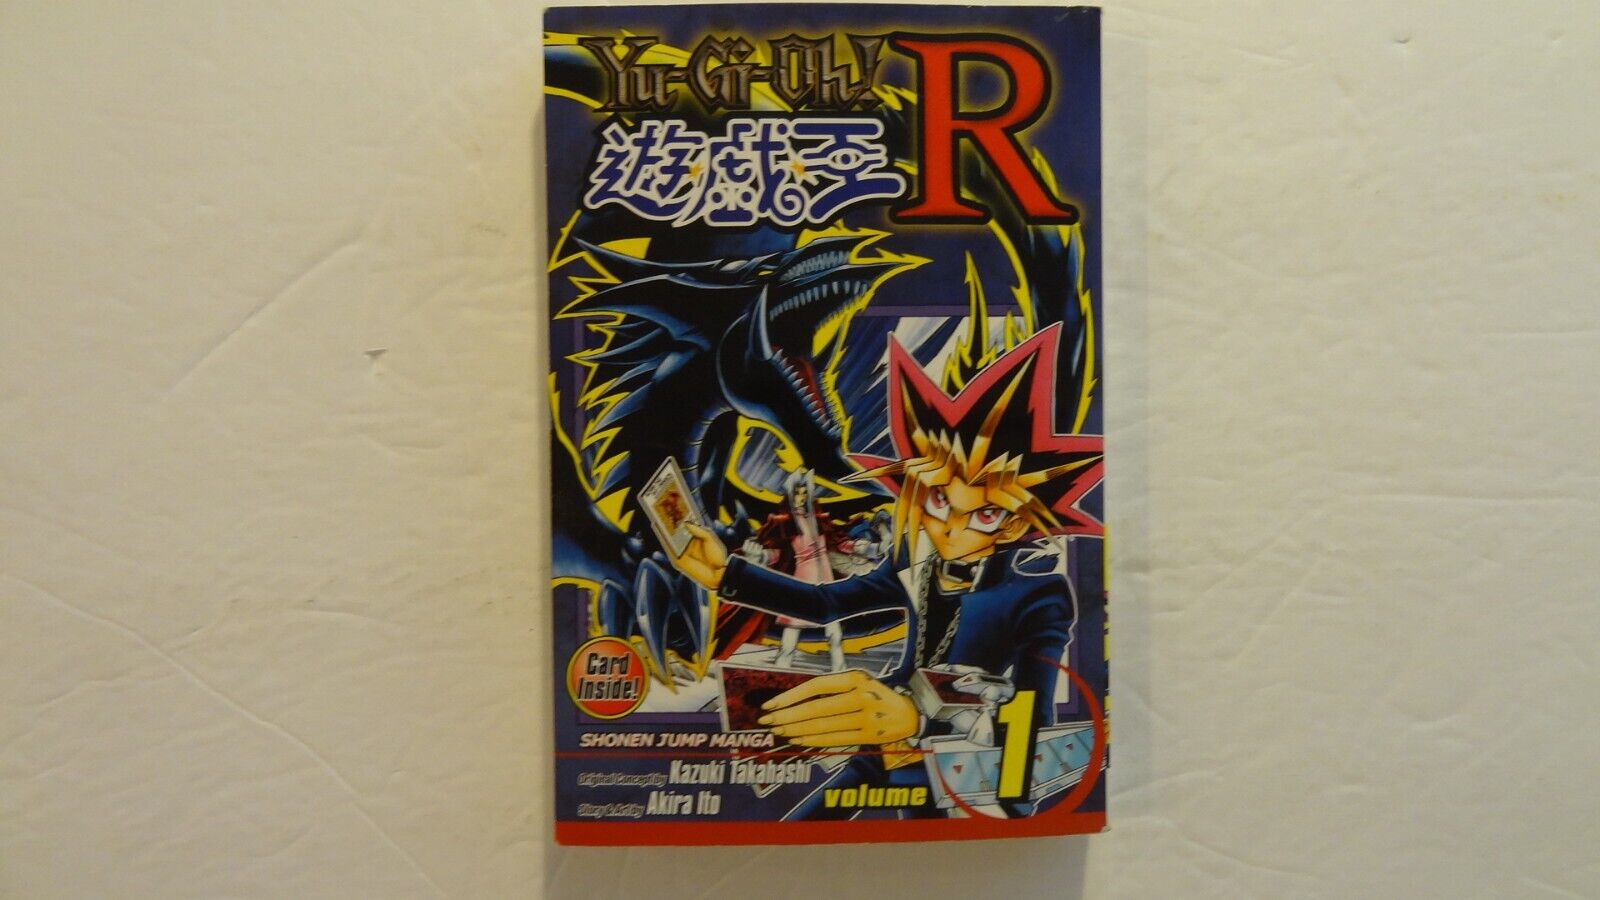 Yu-Gi-oh R Ser.: Yu-Gi-Oh R, Vol. 1 by Akira Ito (2009) (CARD MISSING) - ACCPT